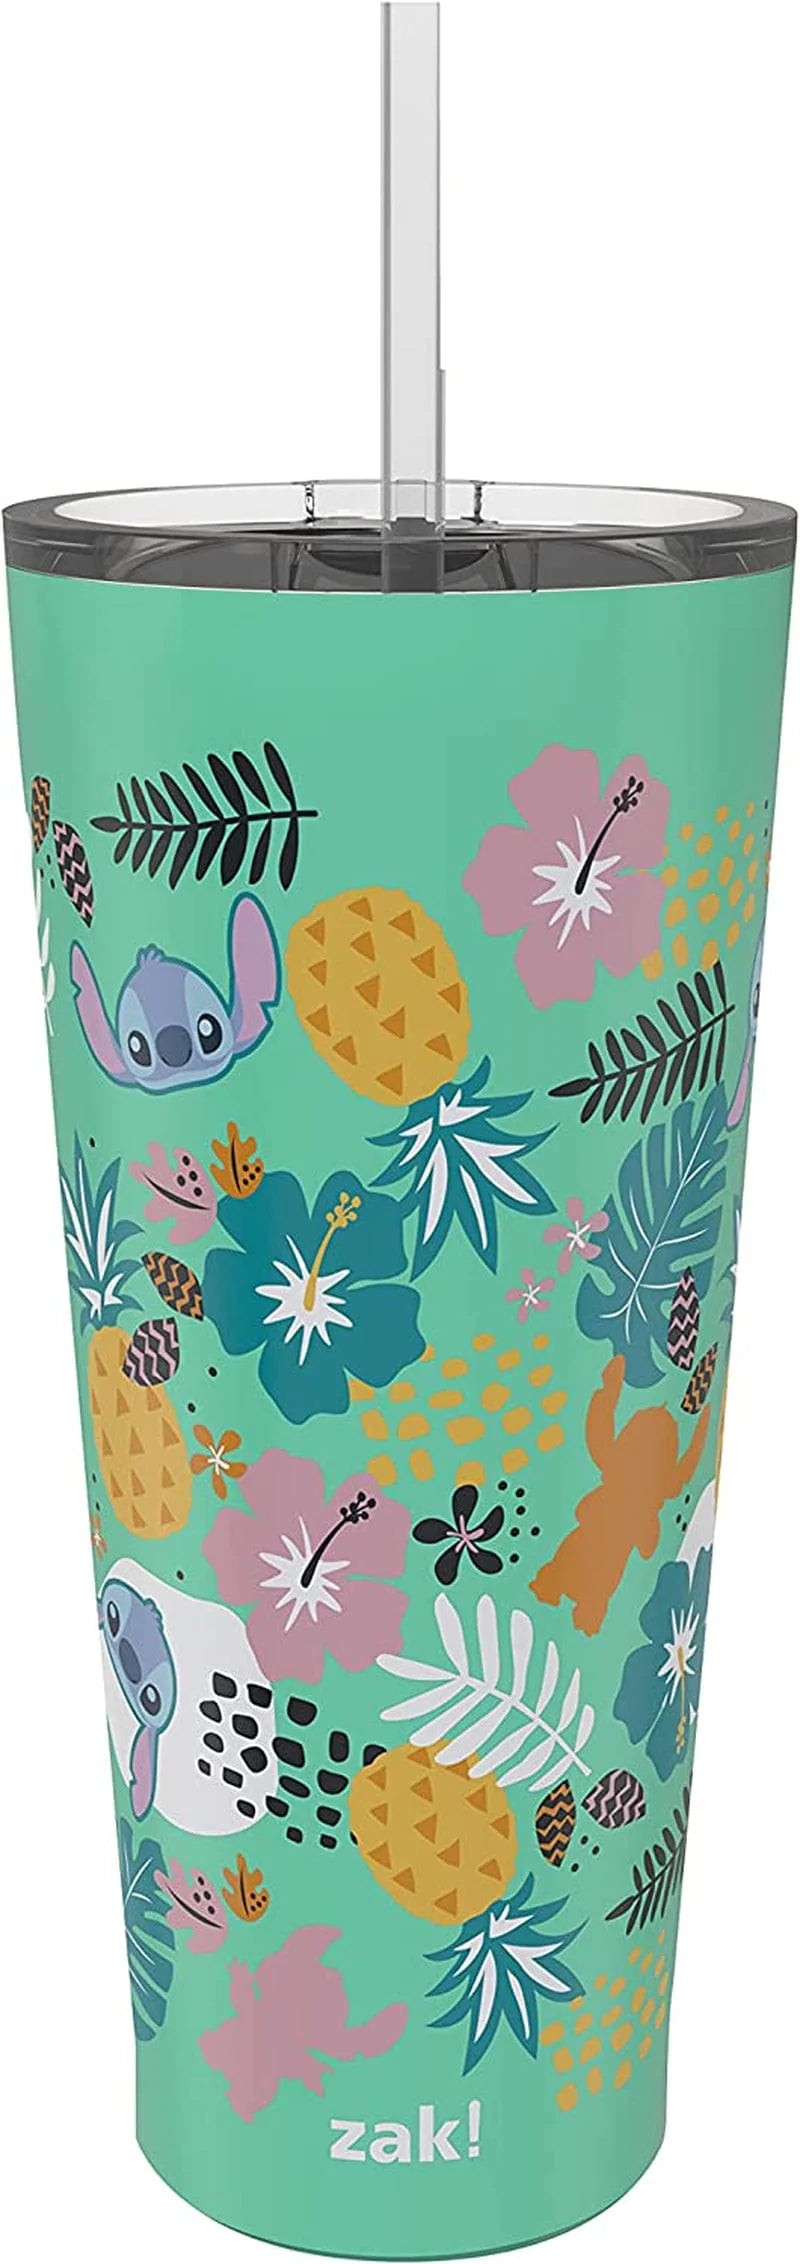 Zak Designs Sanrio Hello Kitty Vacuum Insulated Stainless Steel Travel Tumbler with Splash-Proof Lid, Includes Reusable Plastic Straw and Fits in Car Cup Holders (18/8 SS, 25 Oz) Home & Garden > Kitchen & Dining > Tableware > Drinkware Zak Designs Lilo and Stitch 1 Count (Pack of 1) 